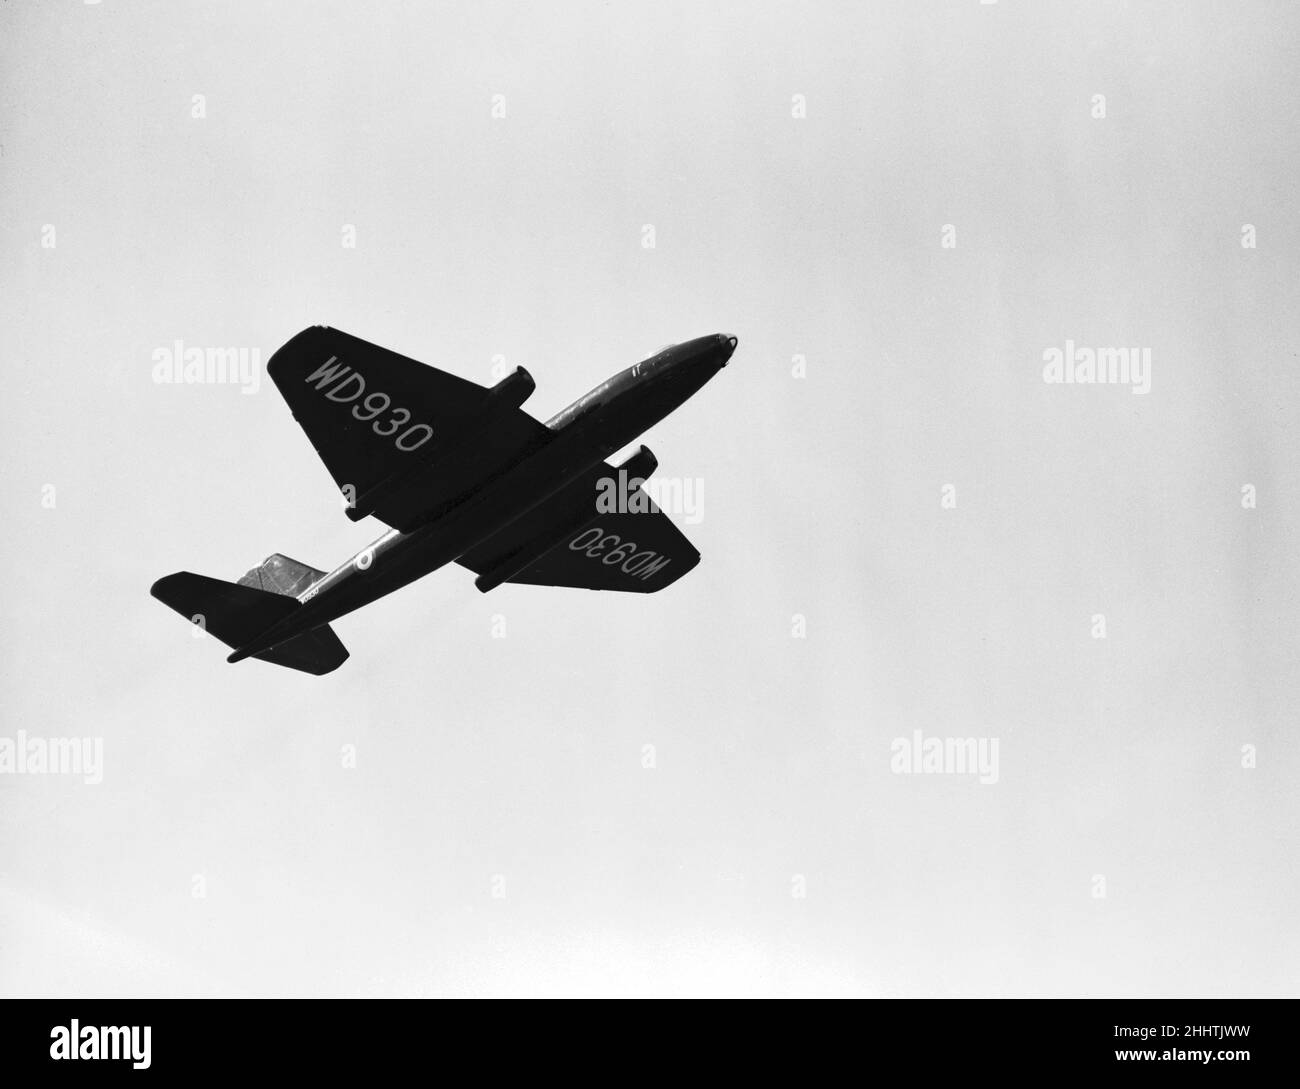 Farnborough Air Show held from 5th to 11th September 1953. Farnborough, Hampshire.The English Electric Canberra jet in flight. Stock Photo